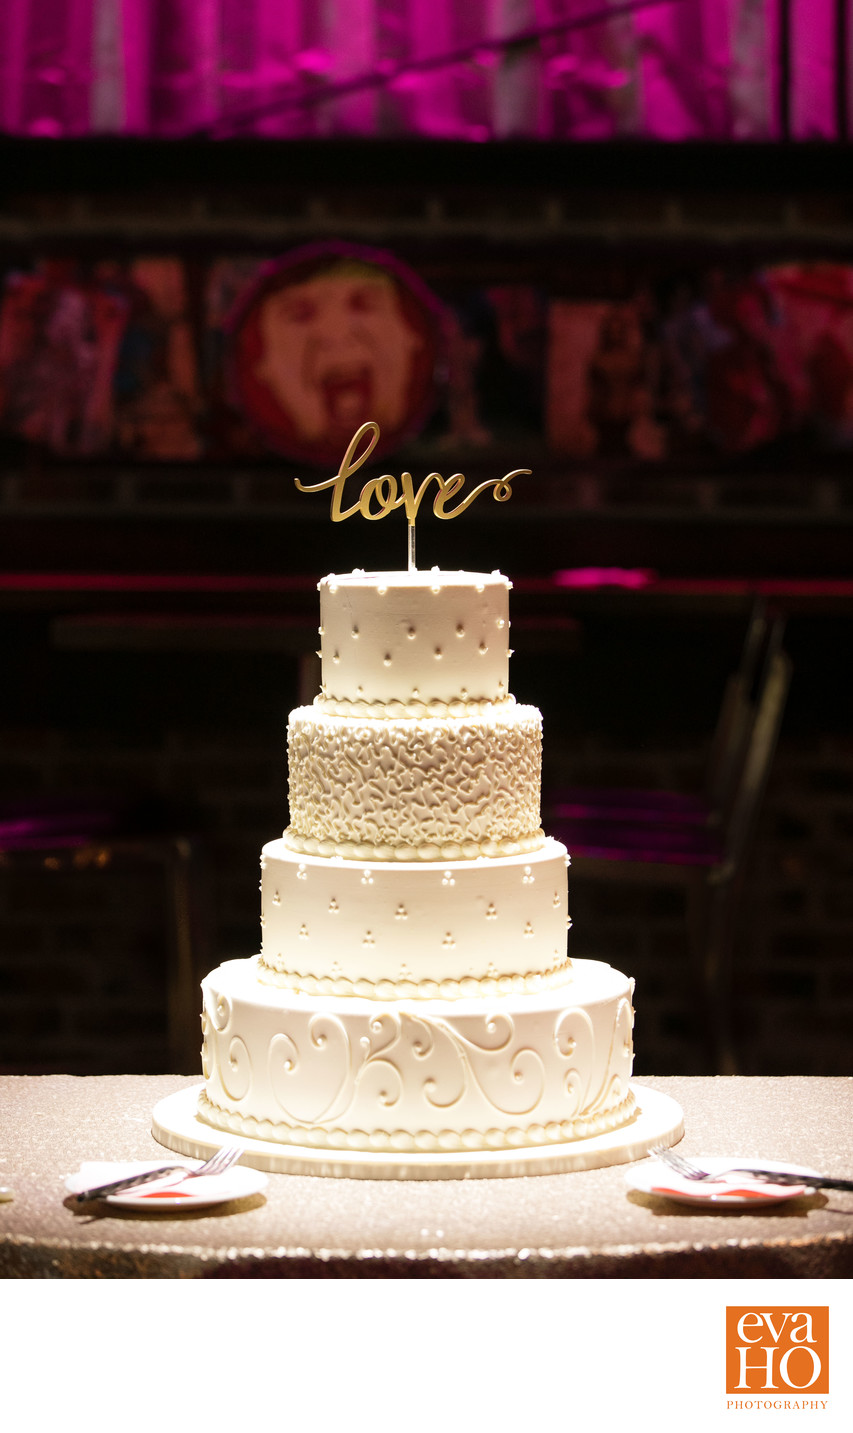 Four-Tier Wedding Cake at Bowling Alley Wedding